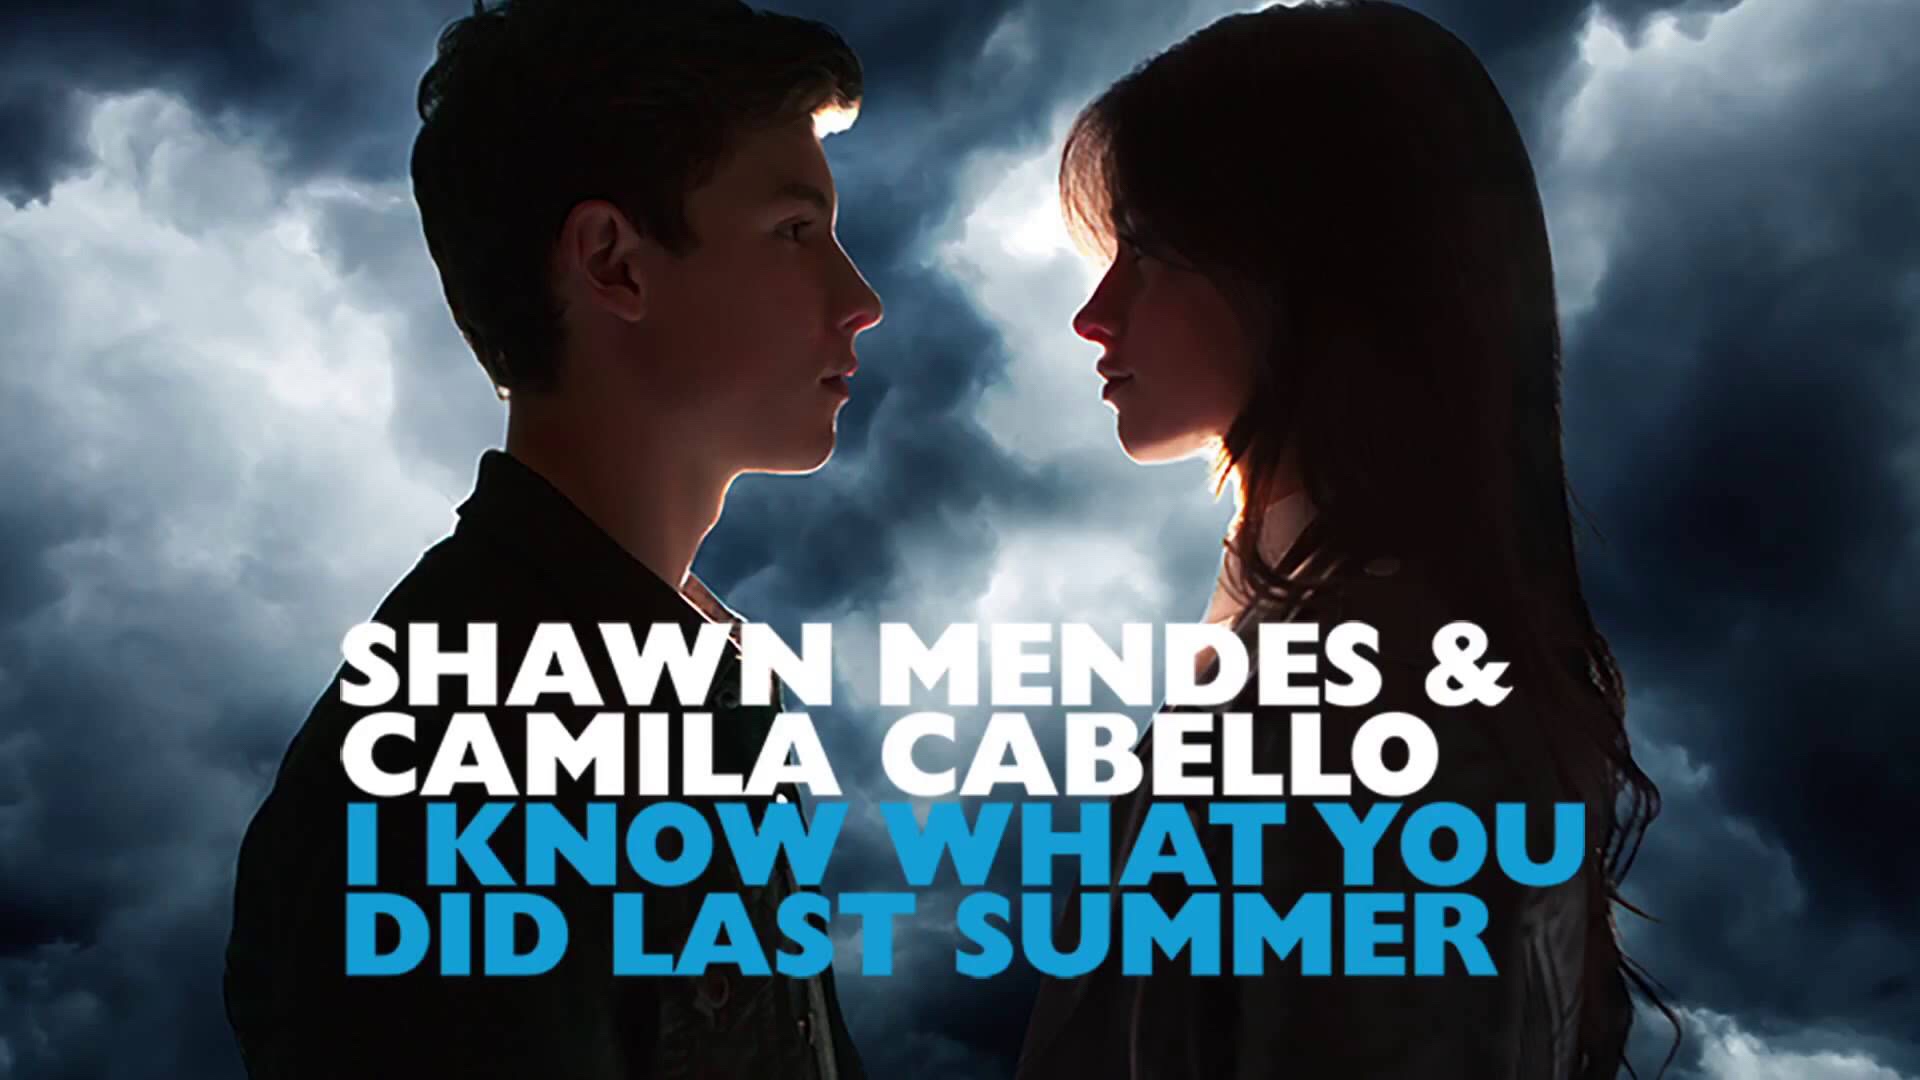 L know what you want. Camila Cabello last Summer. Shawn Mendes & Camila Cabello - i know what you did last Summer. I know what you did last Summer песня. I know what you did.